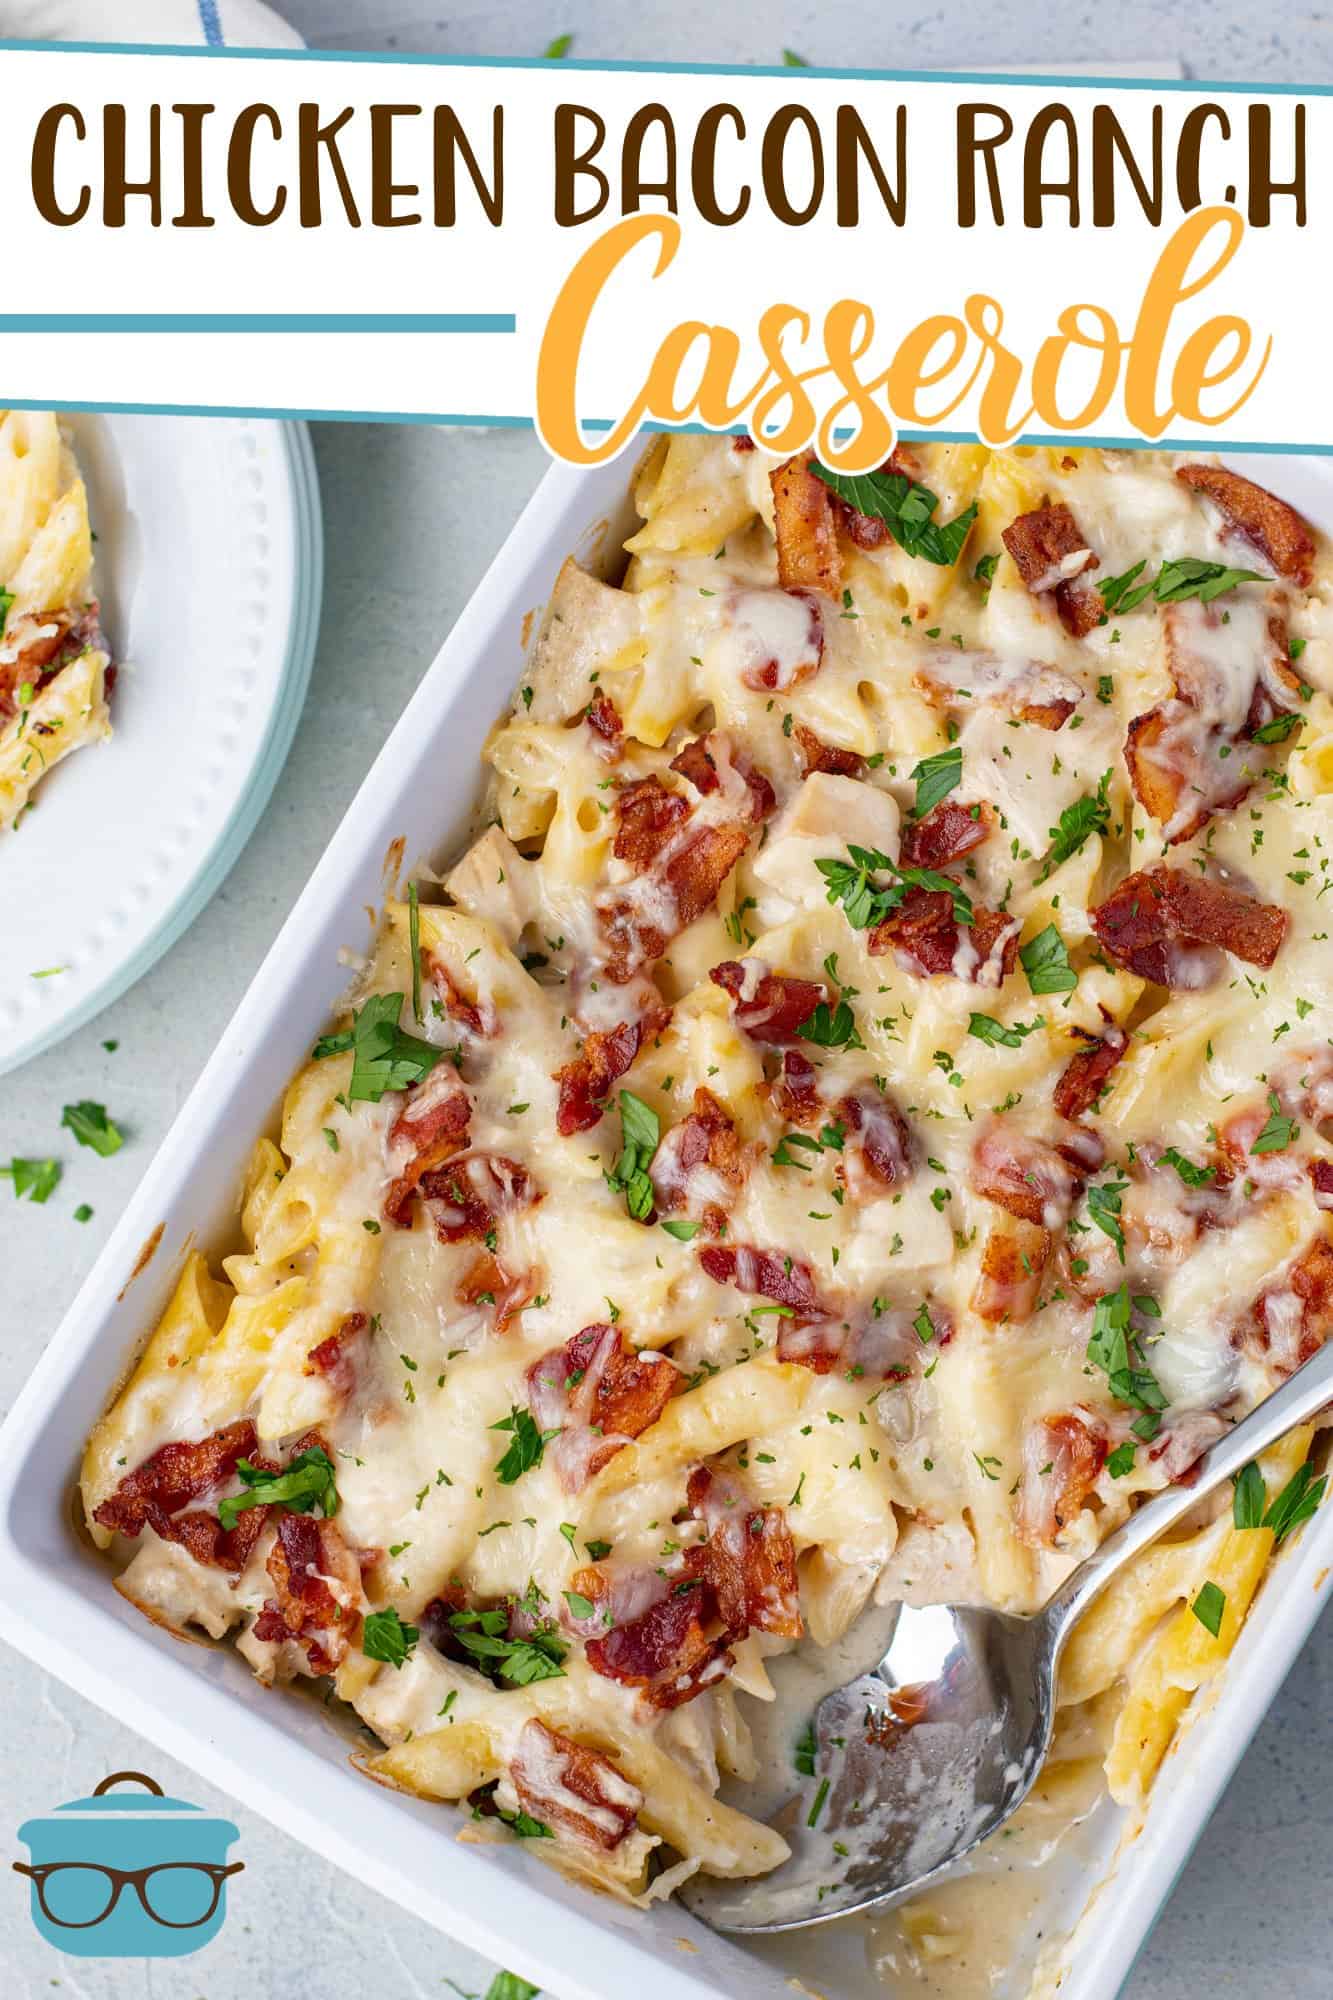 Chicken Bacon Ranch Casserole recipe from The Country Cook shown in a casserole dish and topped with chopped parsley.